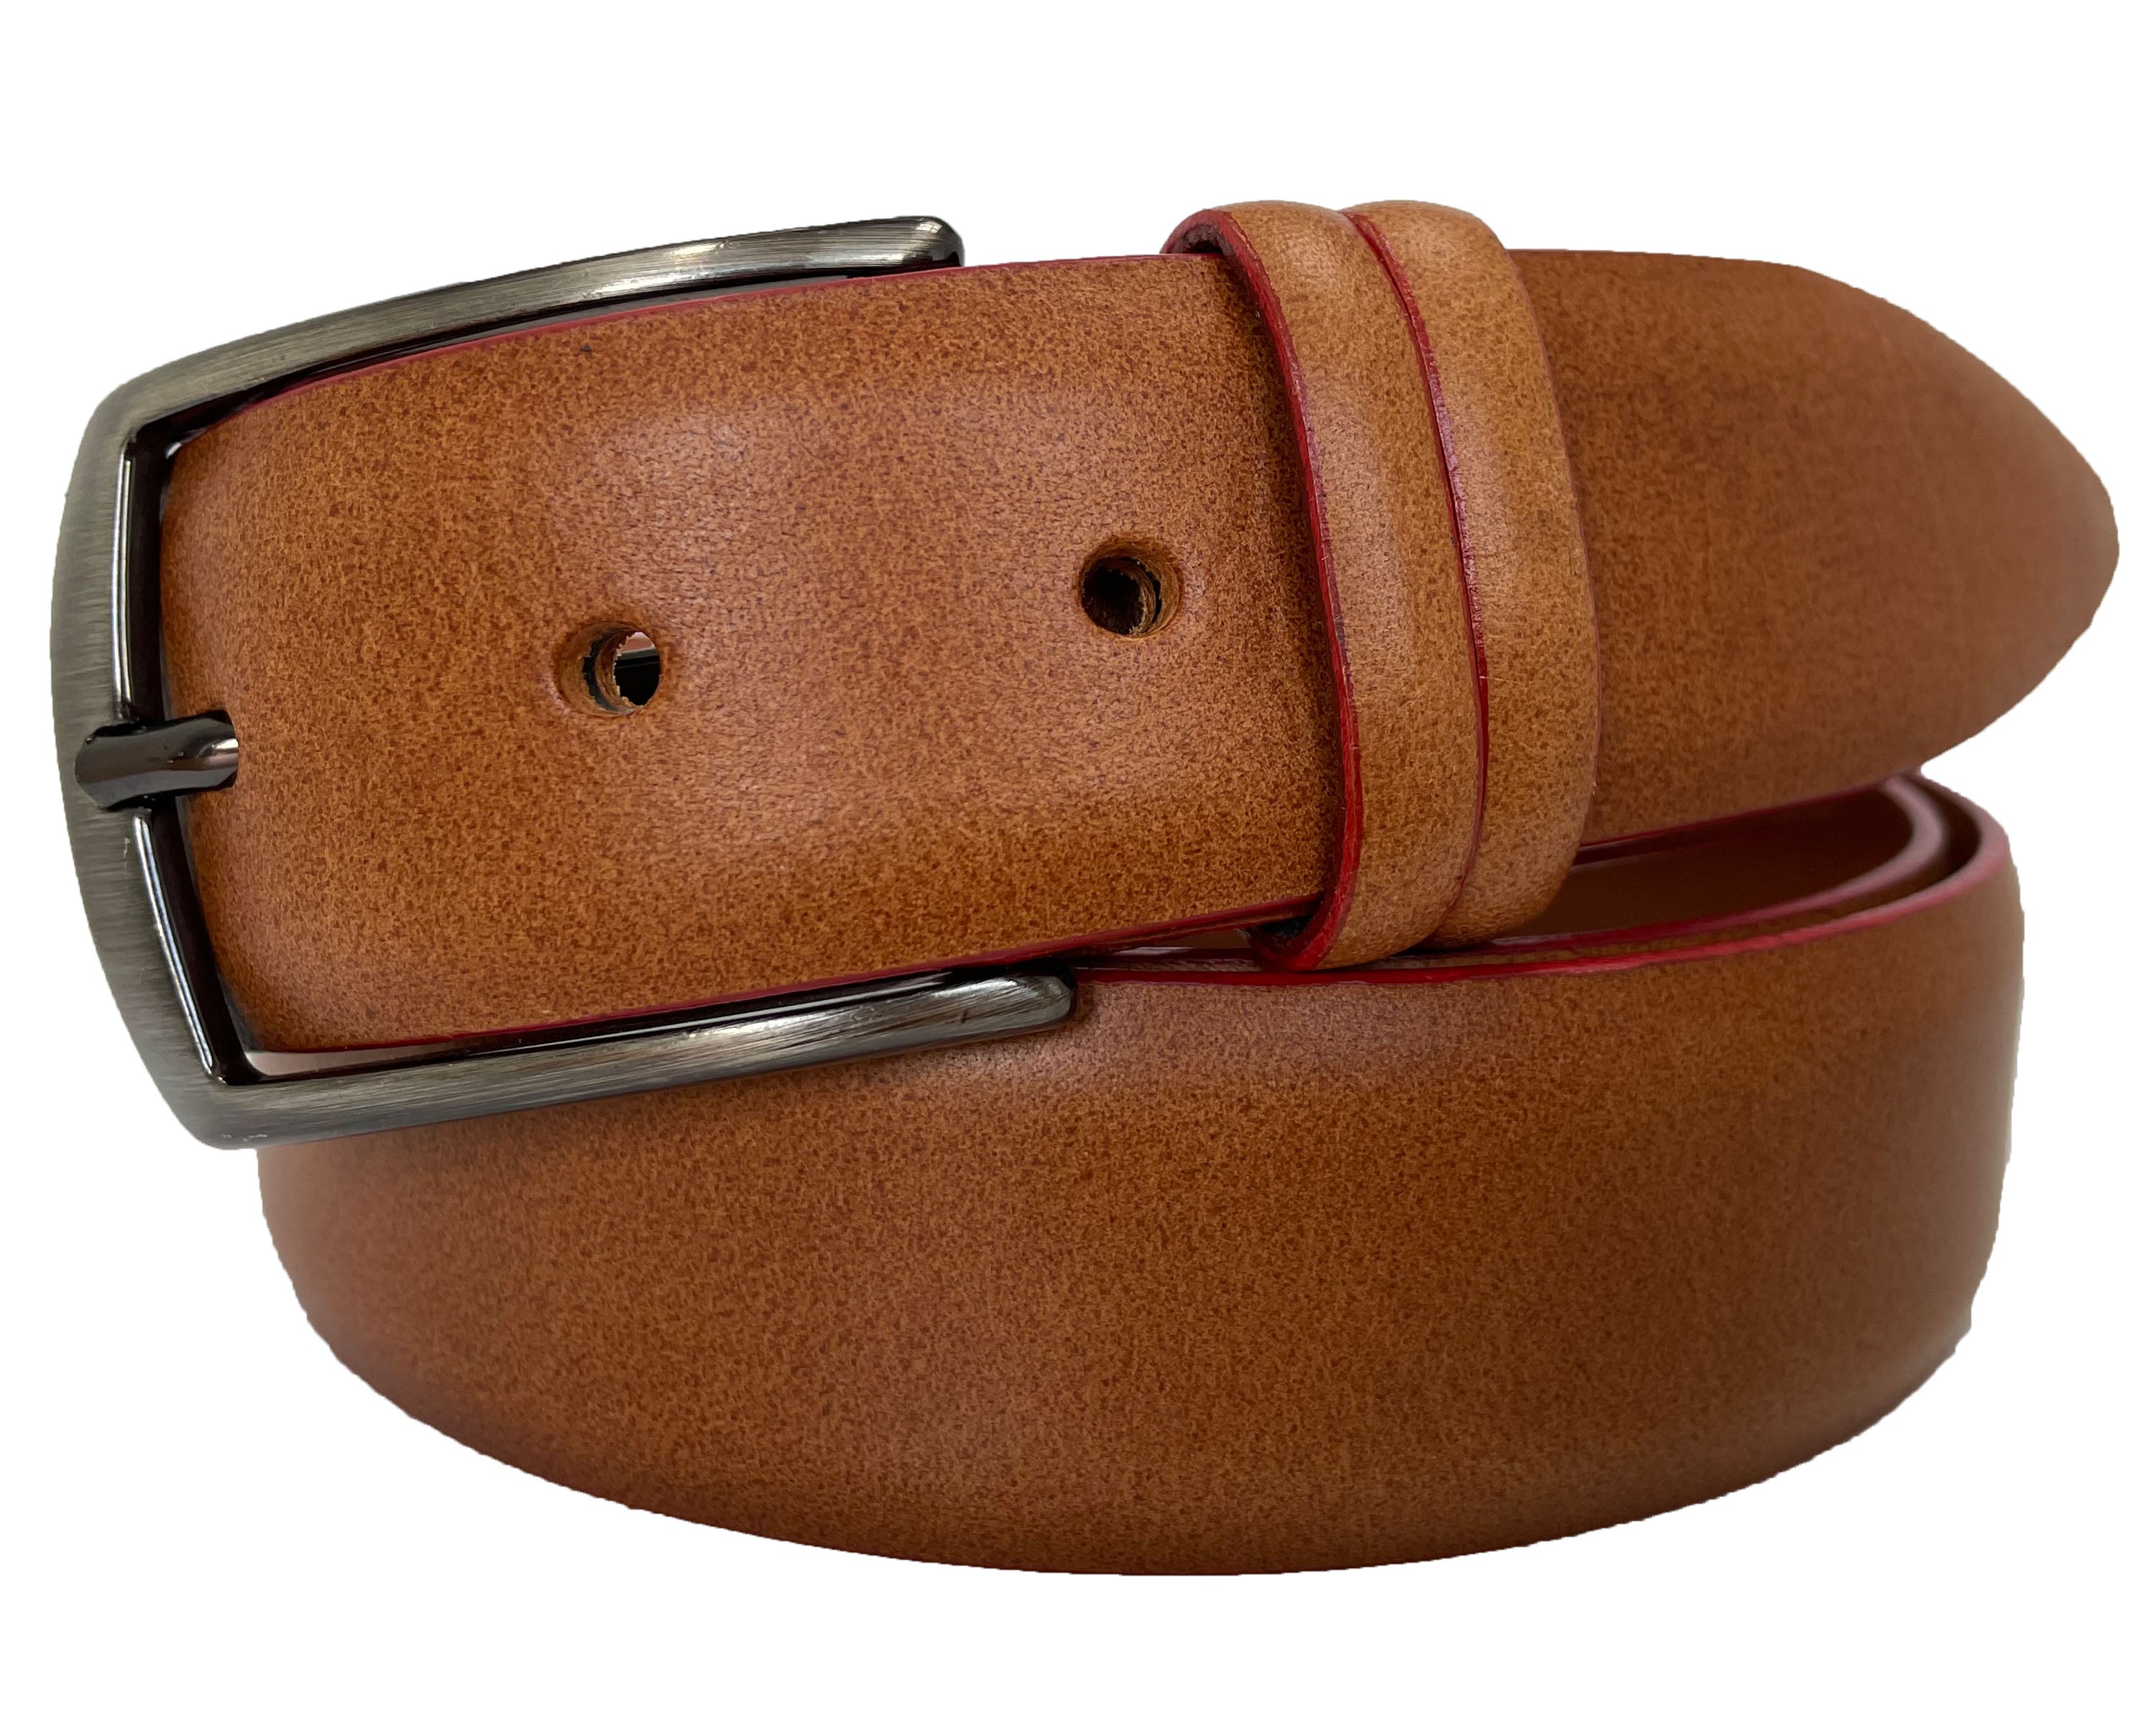 TAN WITH RED EDGE 35MM LEATHER BELT